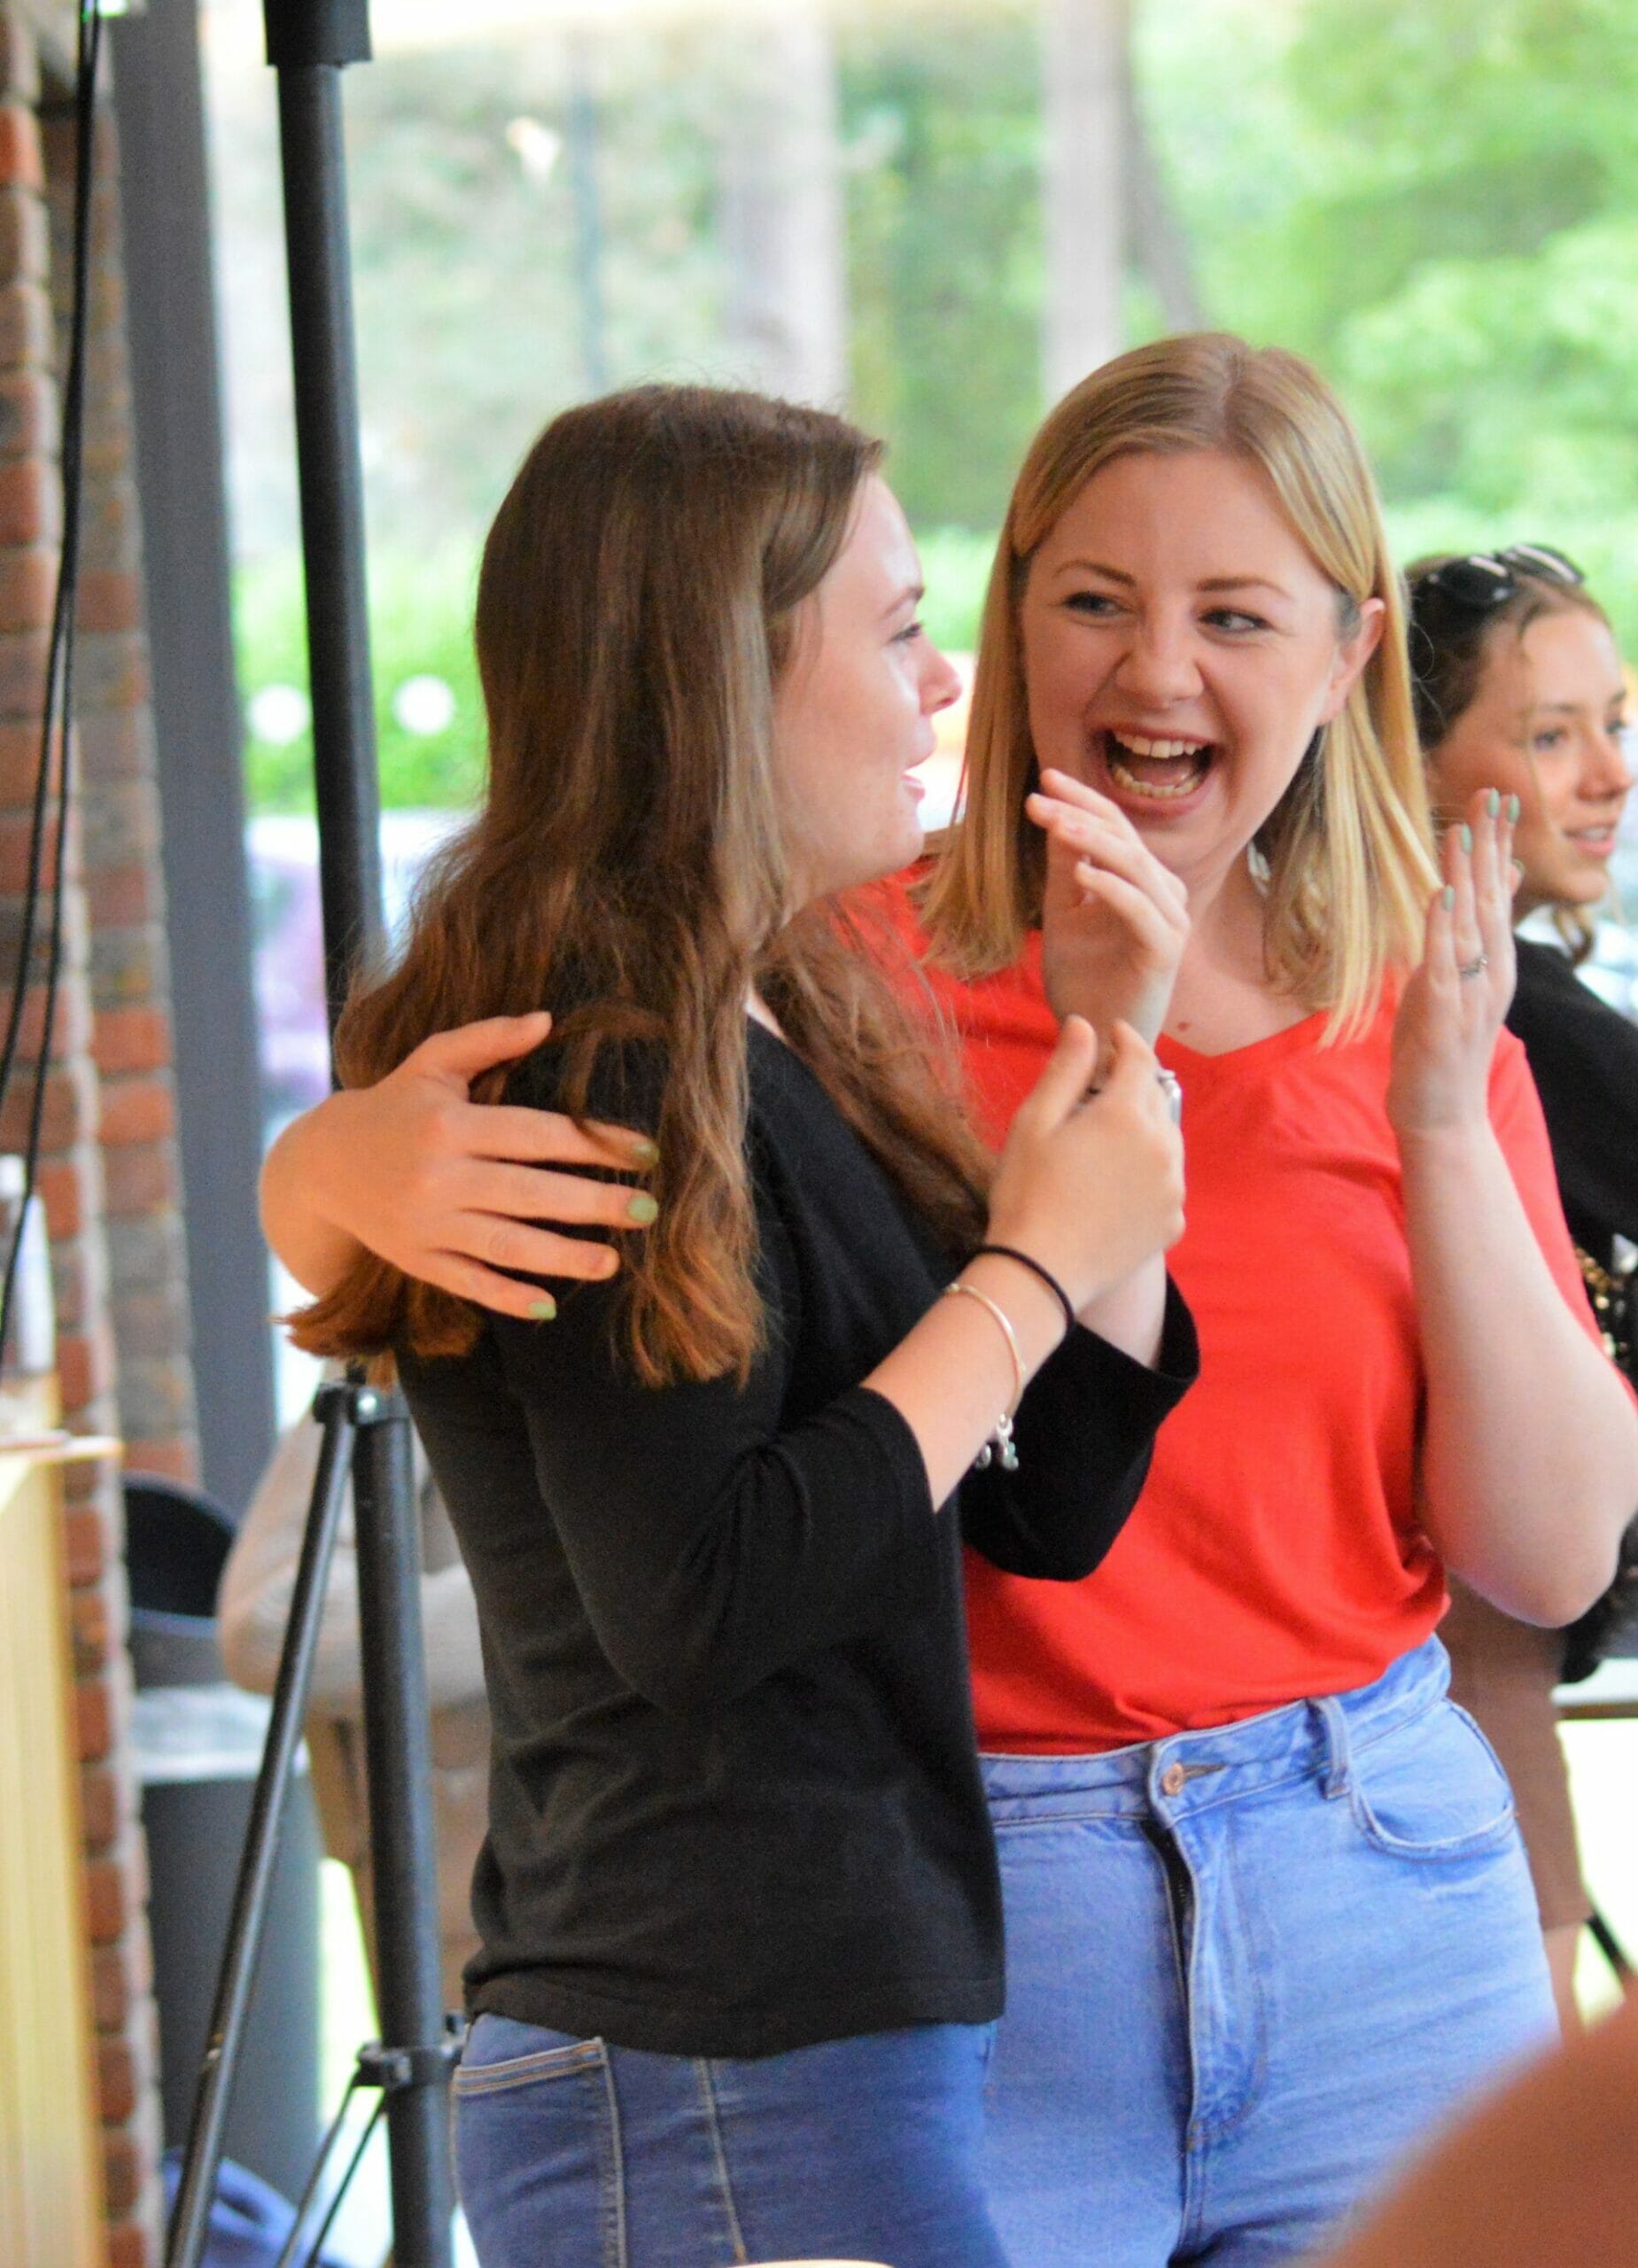 students happy with their exam results